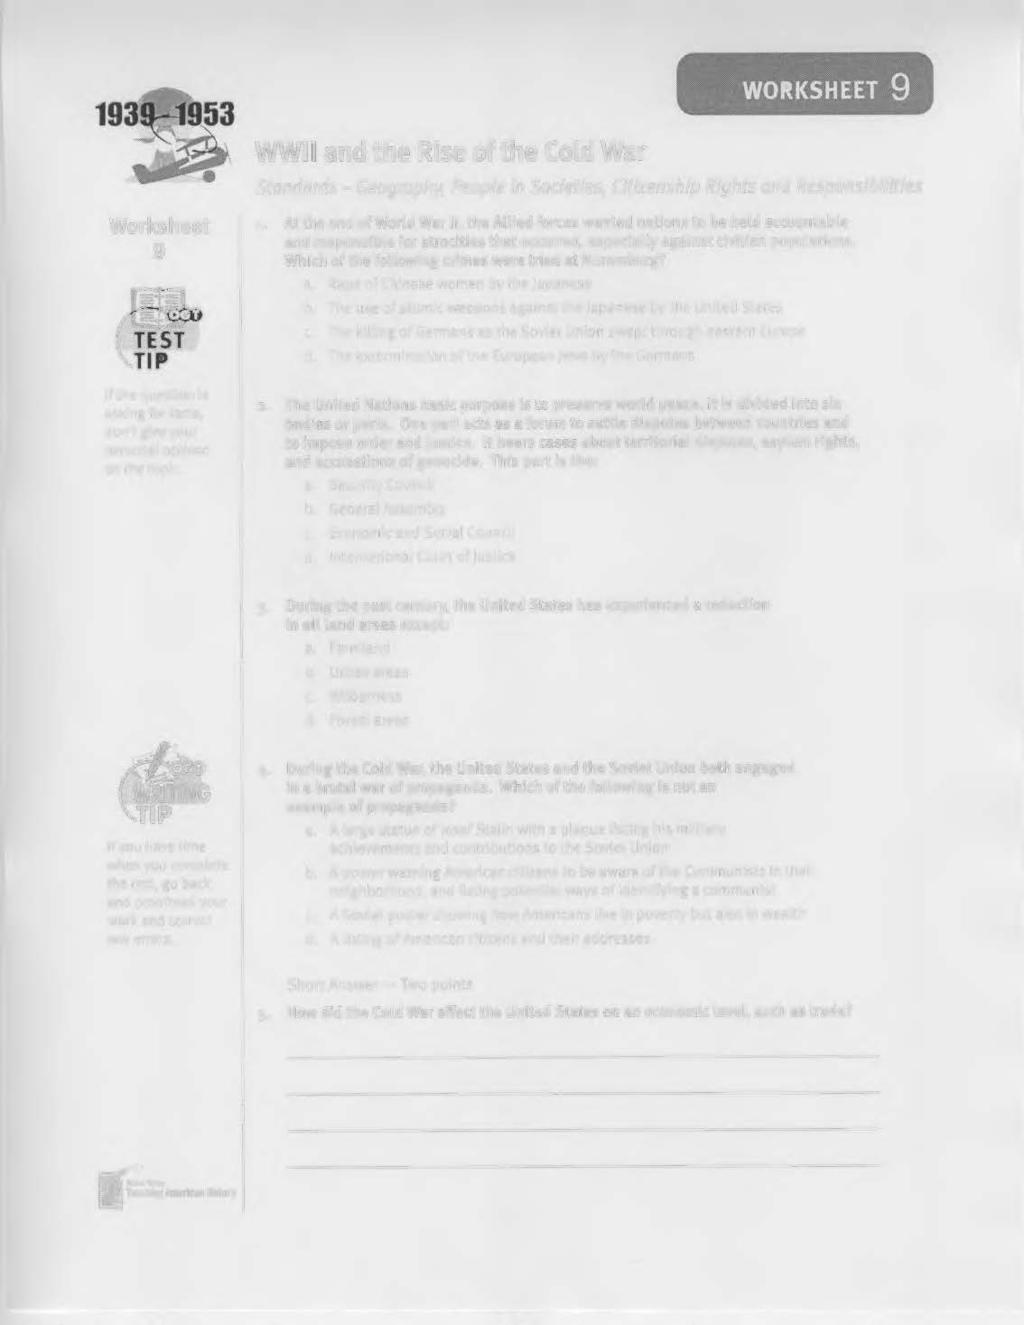 Worksheet Standards- Geography, People in Societies, Citizenship Rights and Responsibilities 1.